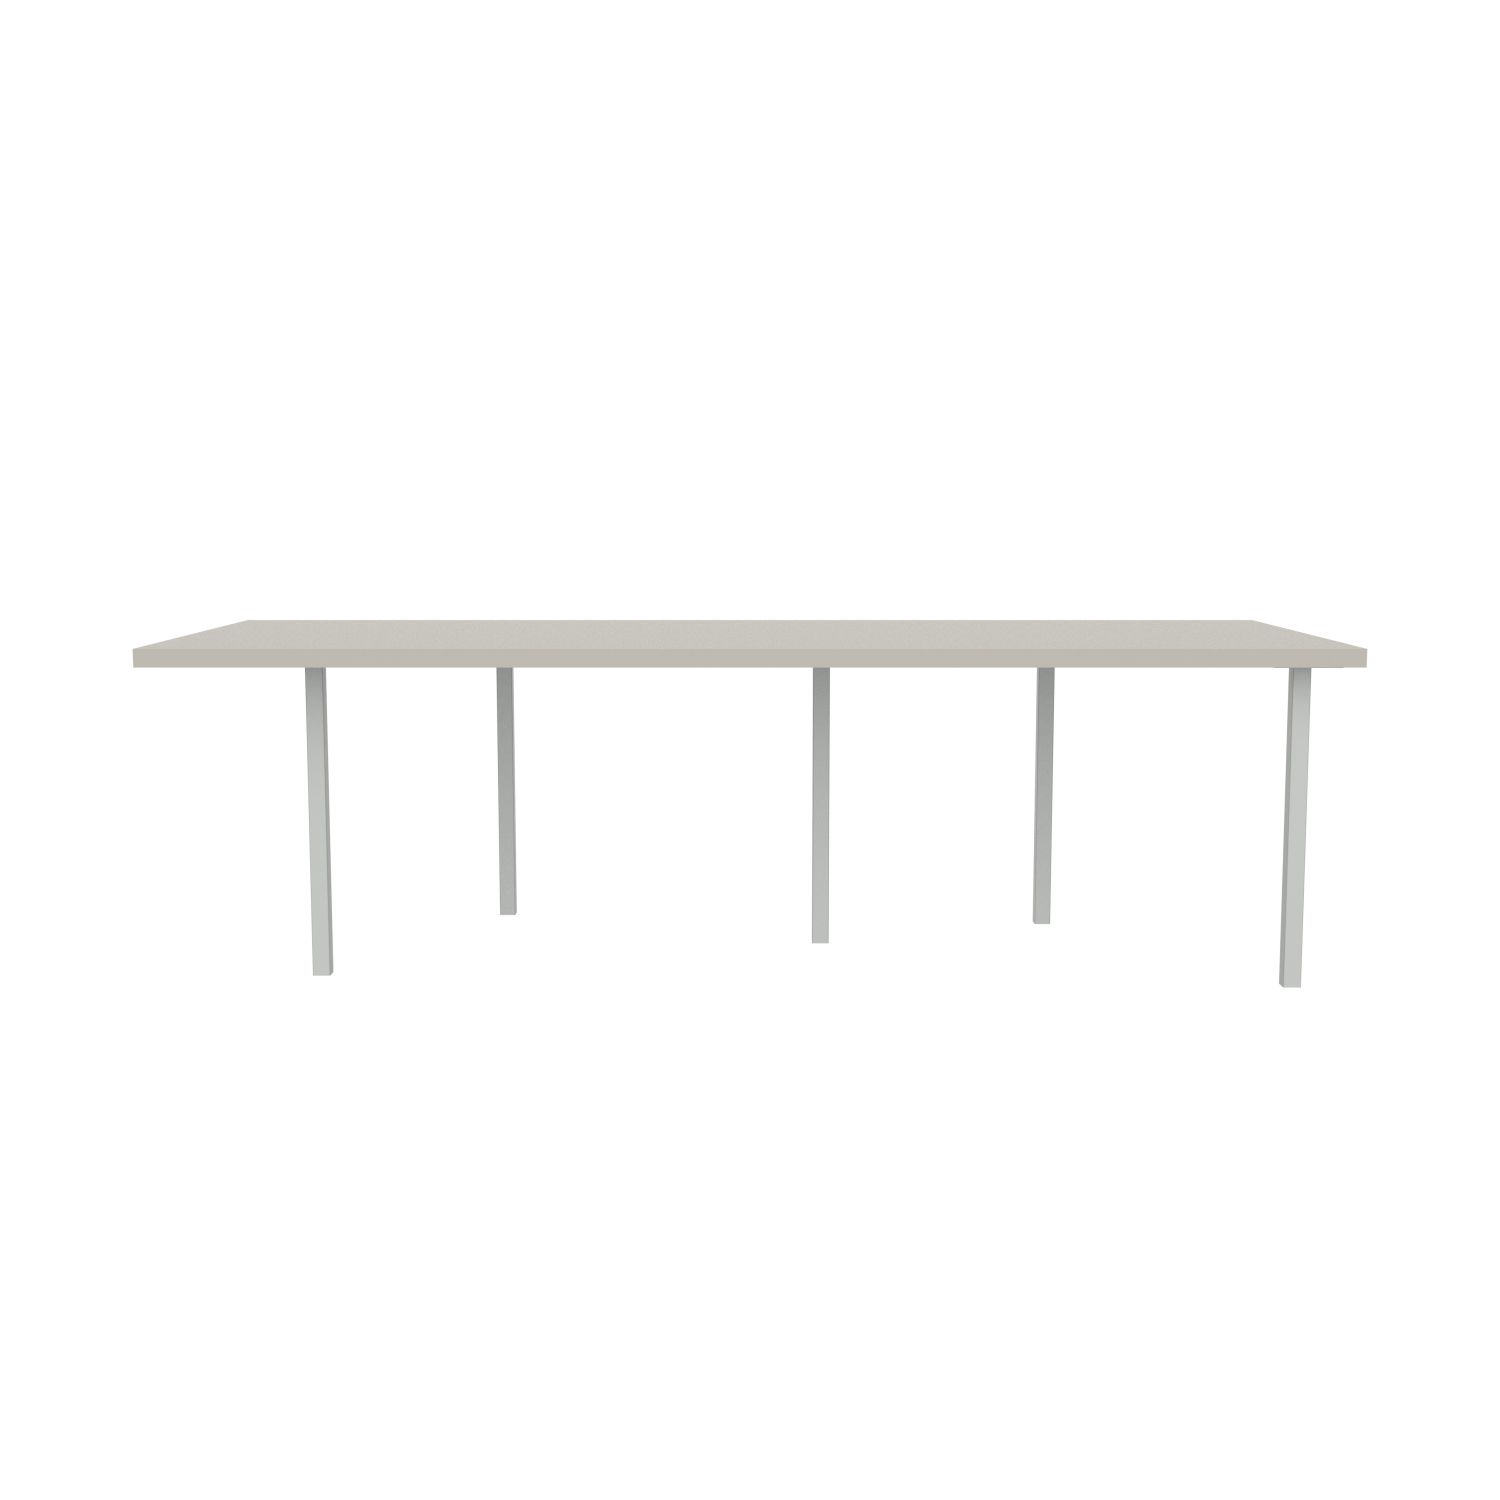 lensvelt bbrand table five fixed heigt 103x264 hpl white 50 mm price level 1 light grey ral7035